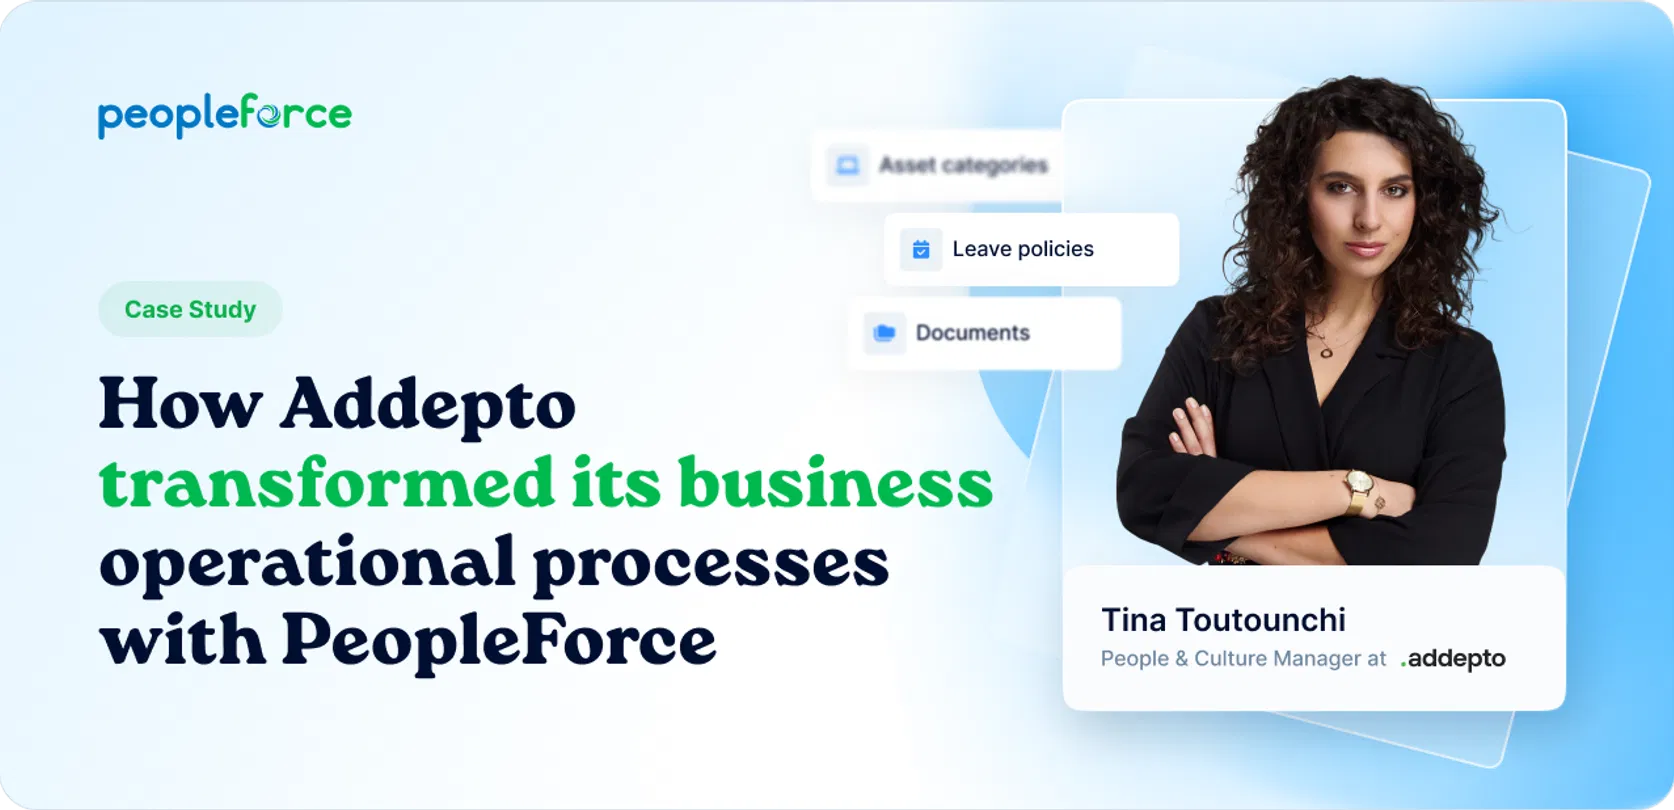 How Addepto transformed its business operational processes with PeopleForce